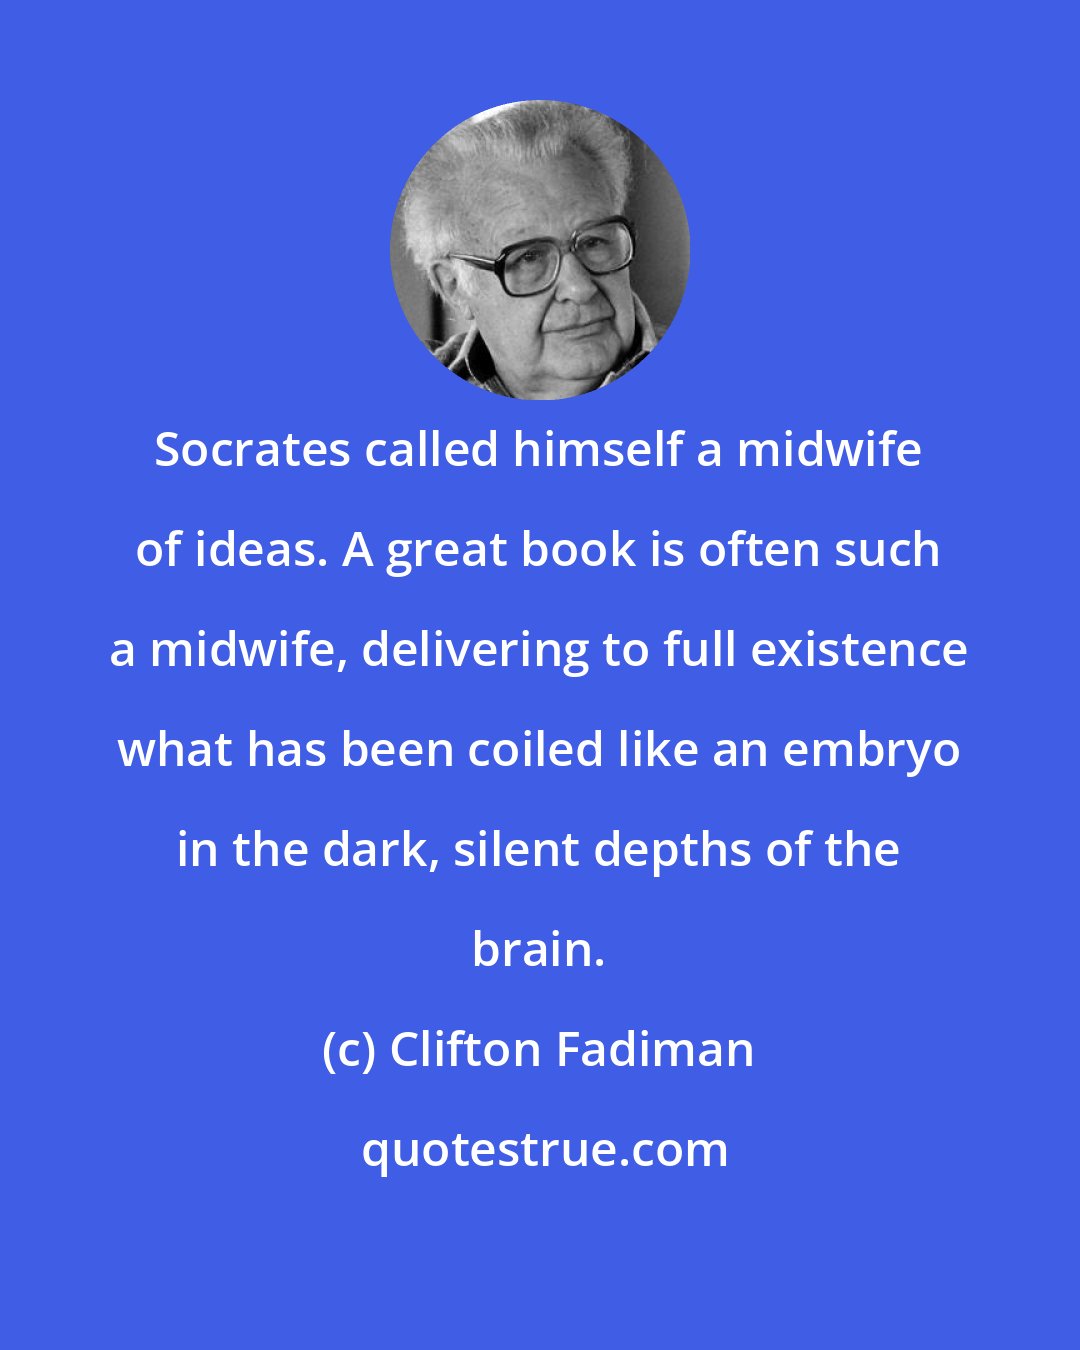 Clifton Fadiman: Socrates called himself a midwife of ideas. A great book is often such a midwife, delivering to full existence what has been coiled like an embryo in the dark, silent depths of the brain.